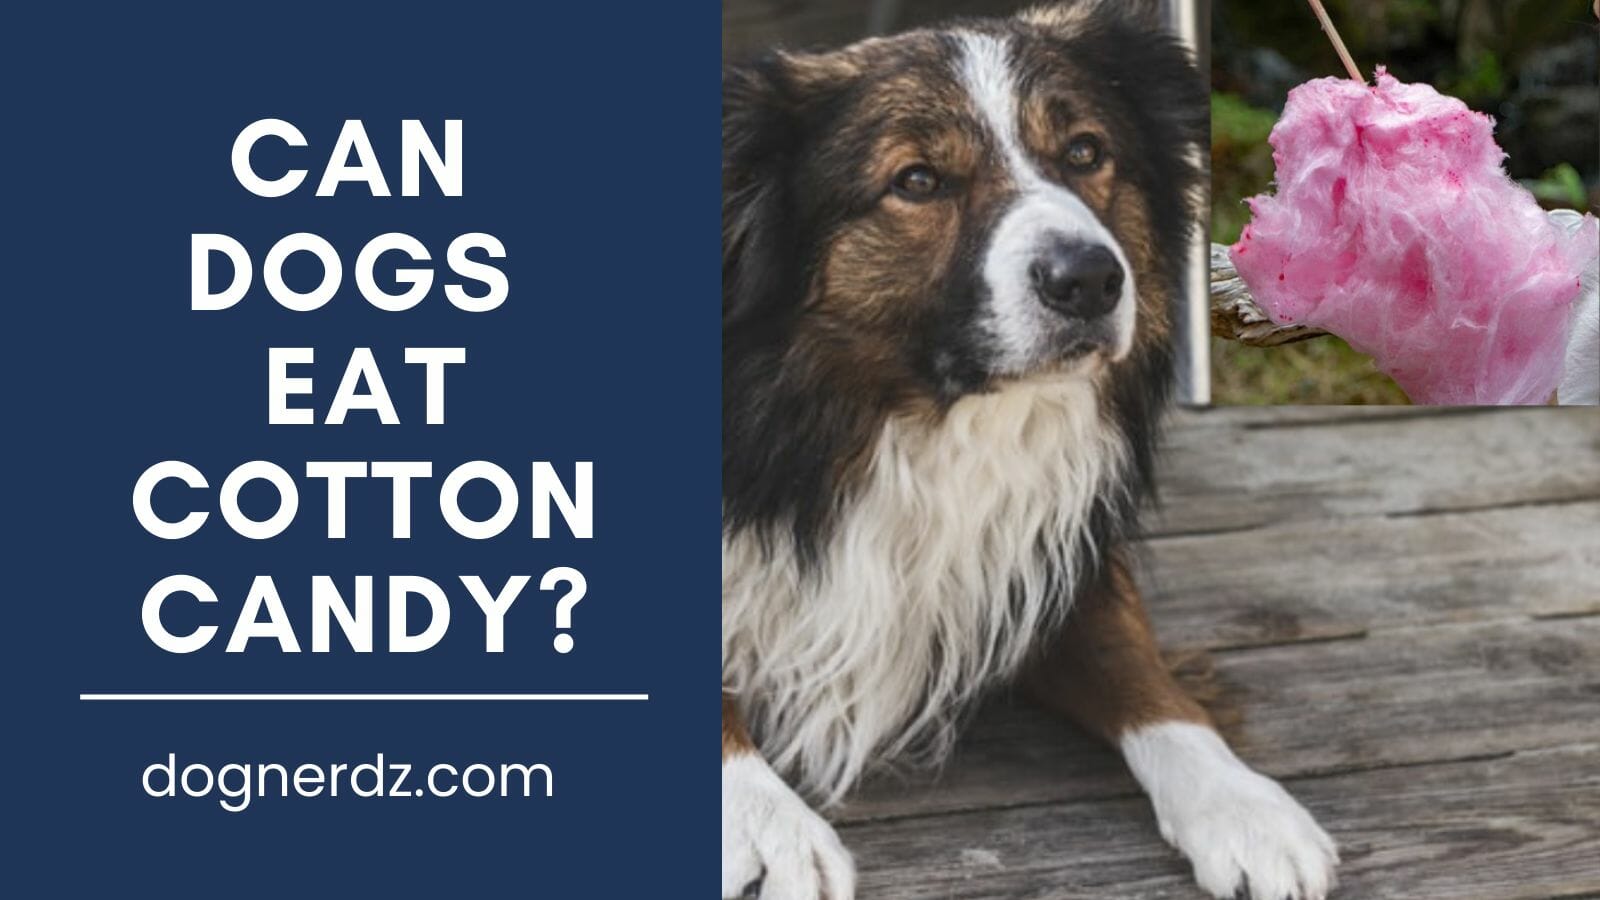 can dogs eat cotton candy?